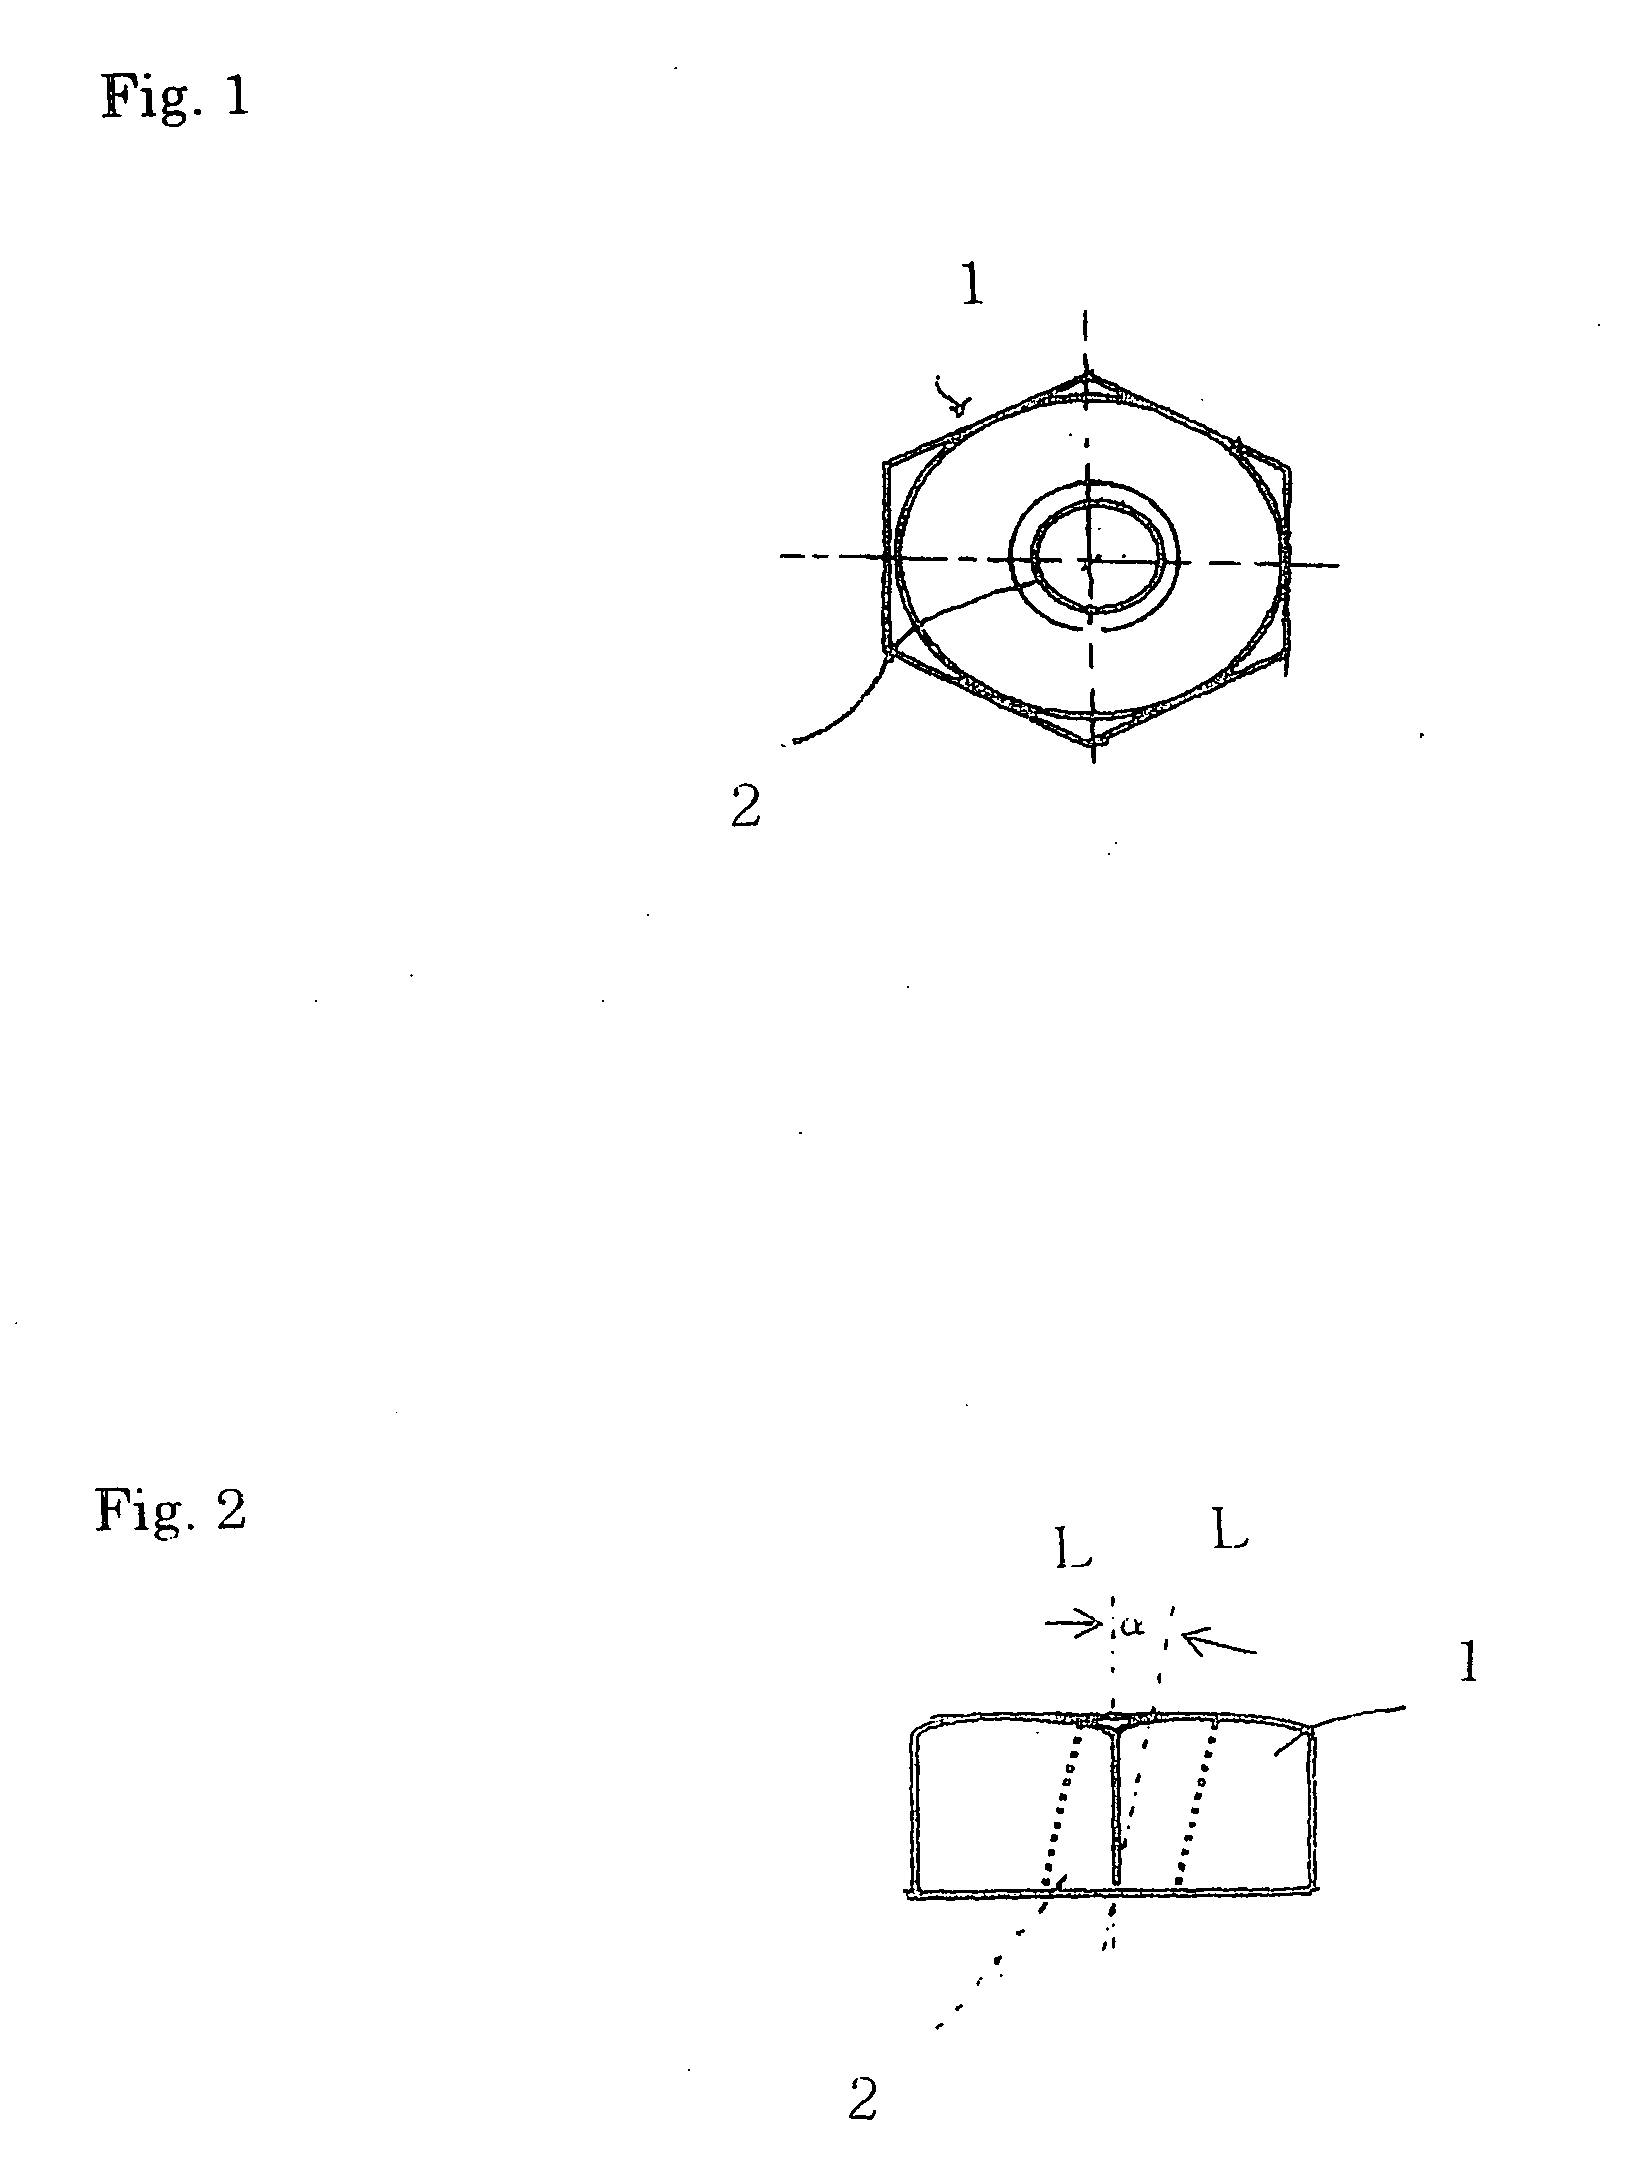 Method of a fastening a bolt and a nut and their fastening structure